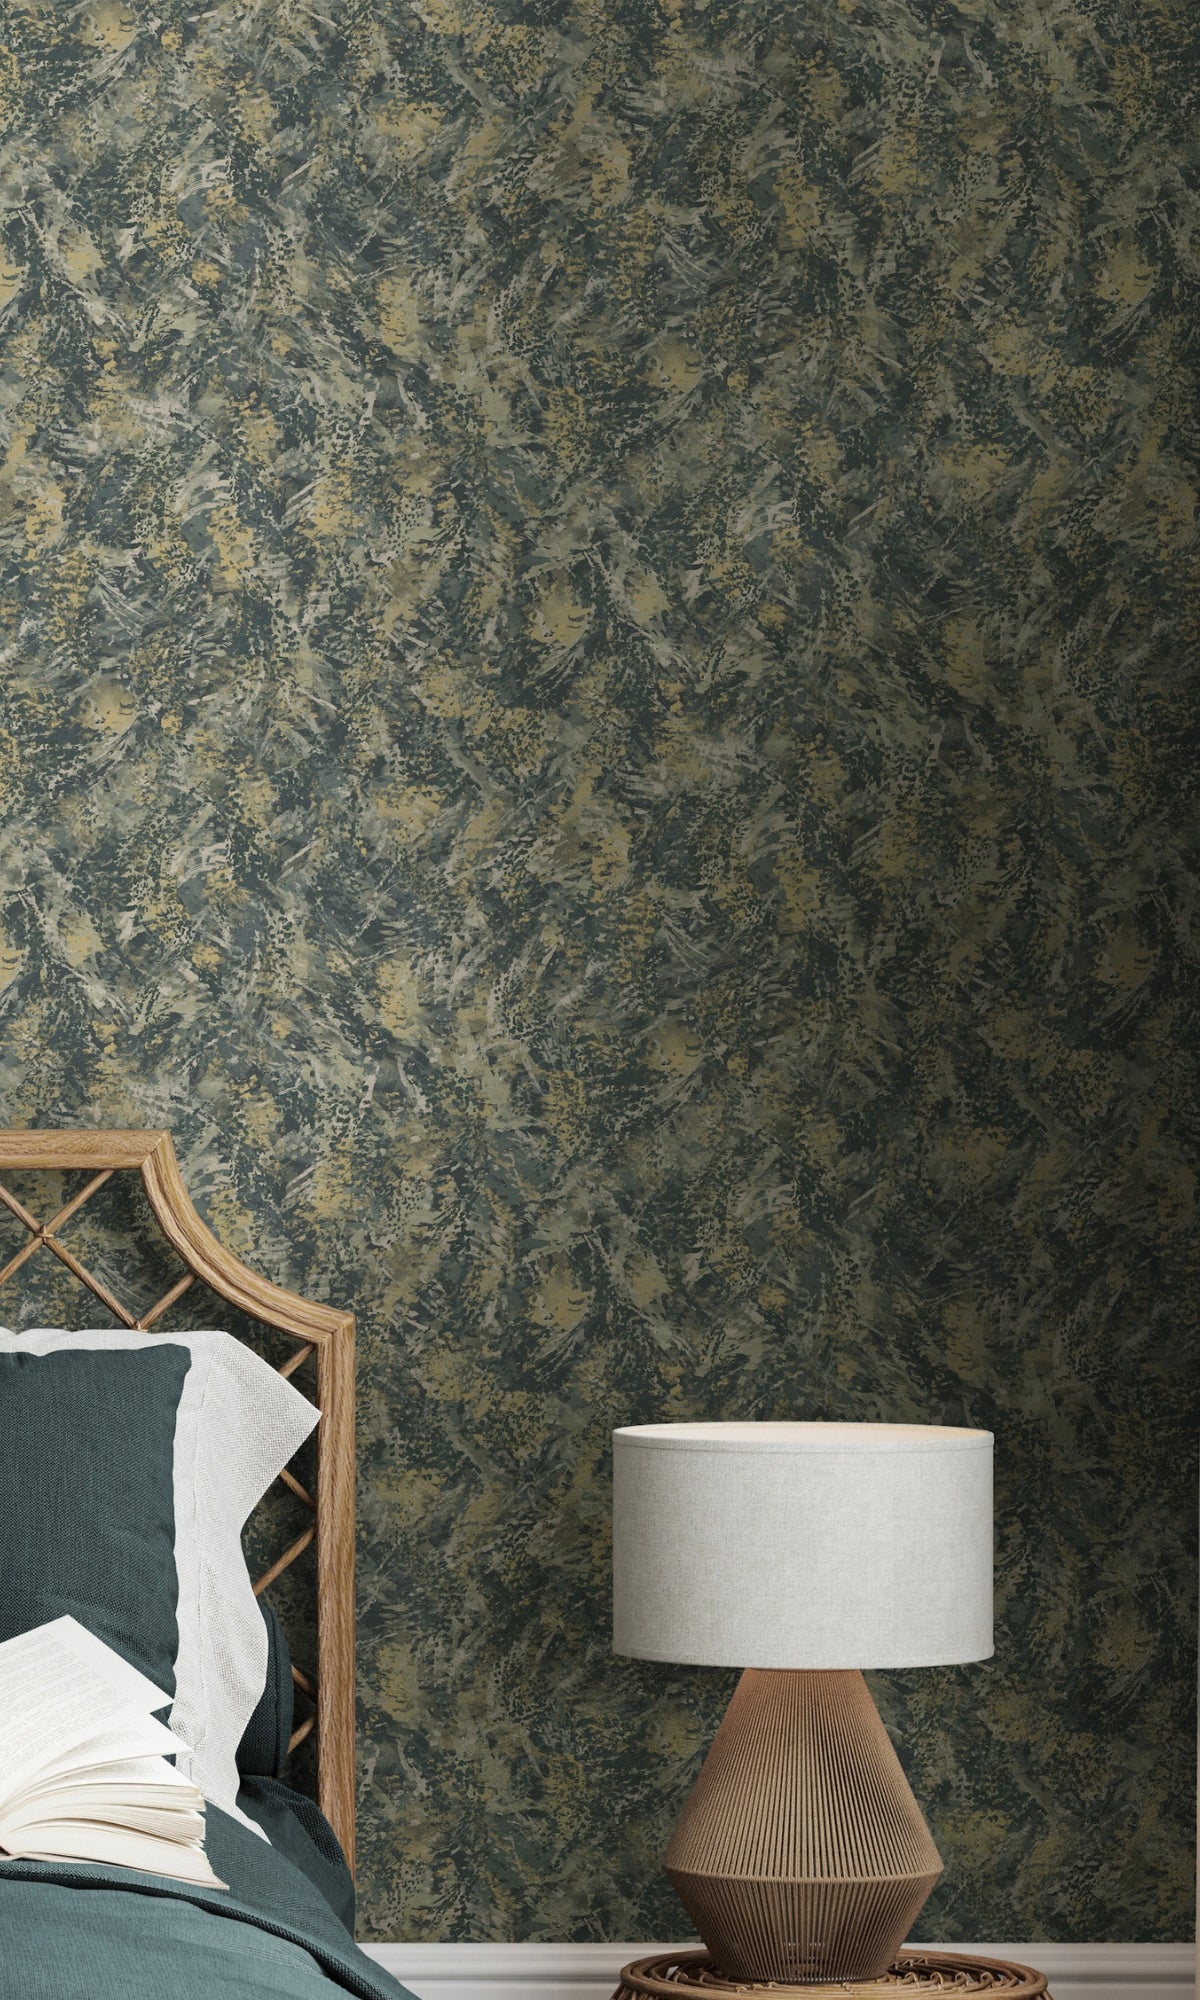 Teal Gold Feather Like Textured Abstract Wallpaper R8939